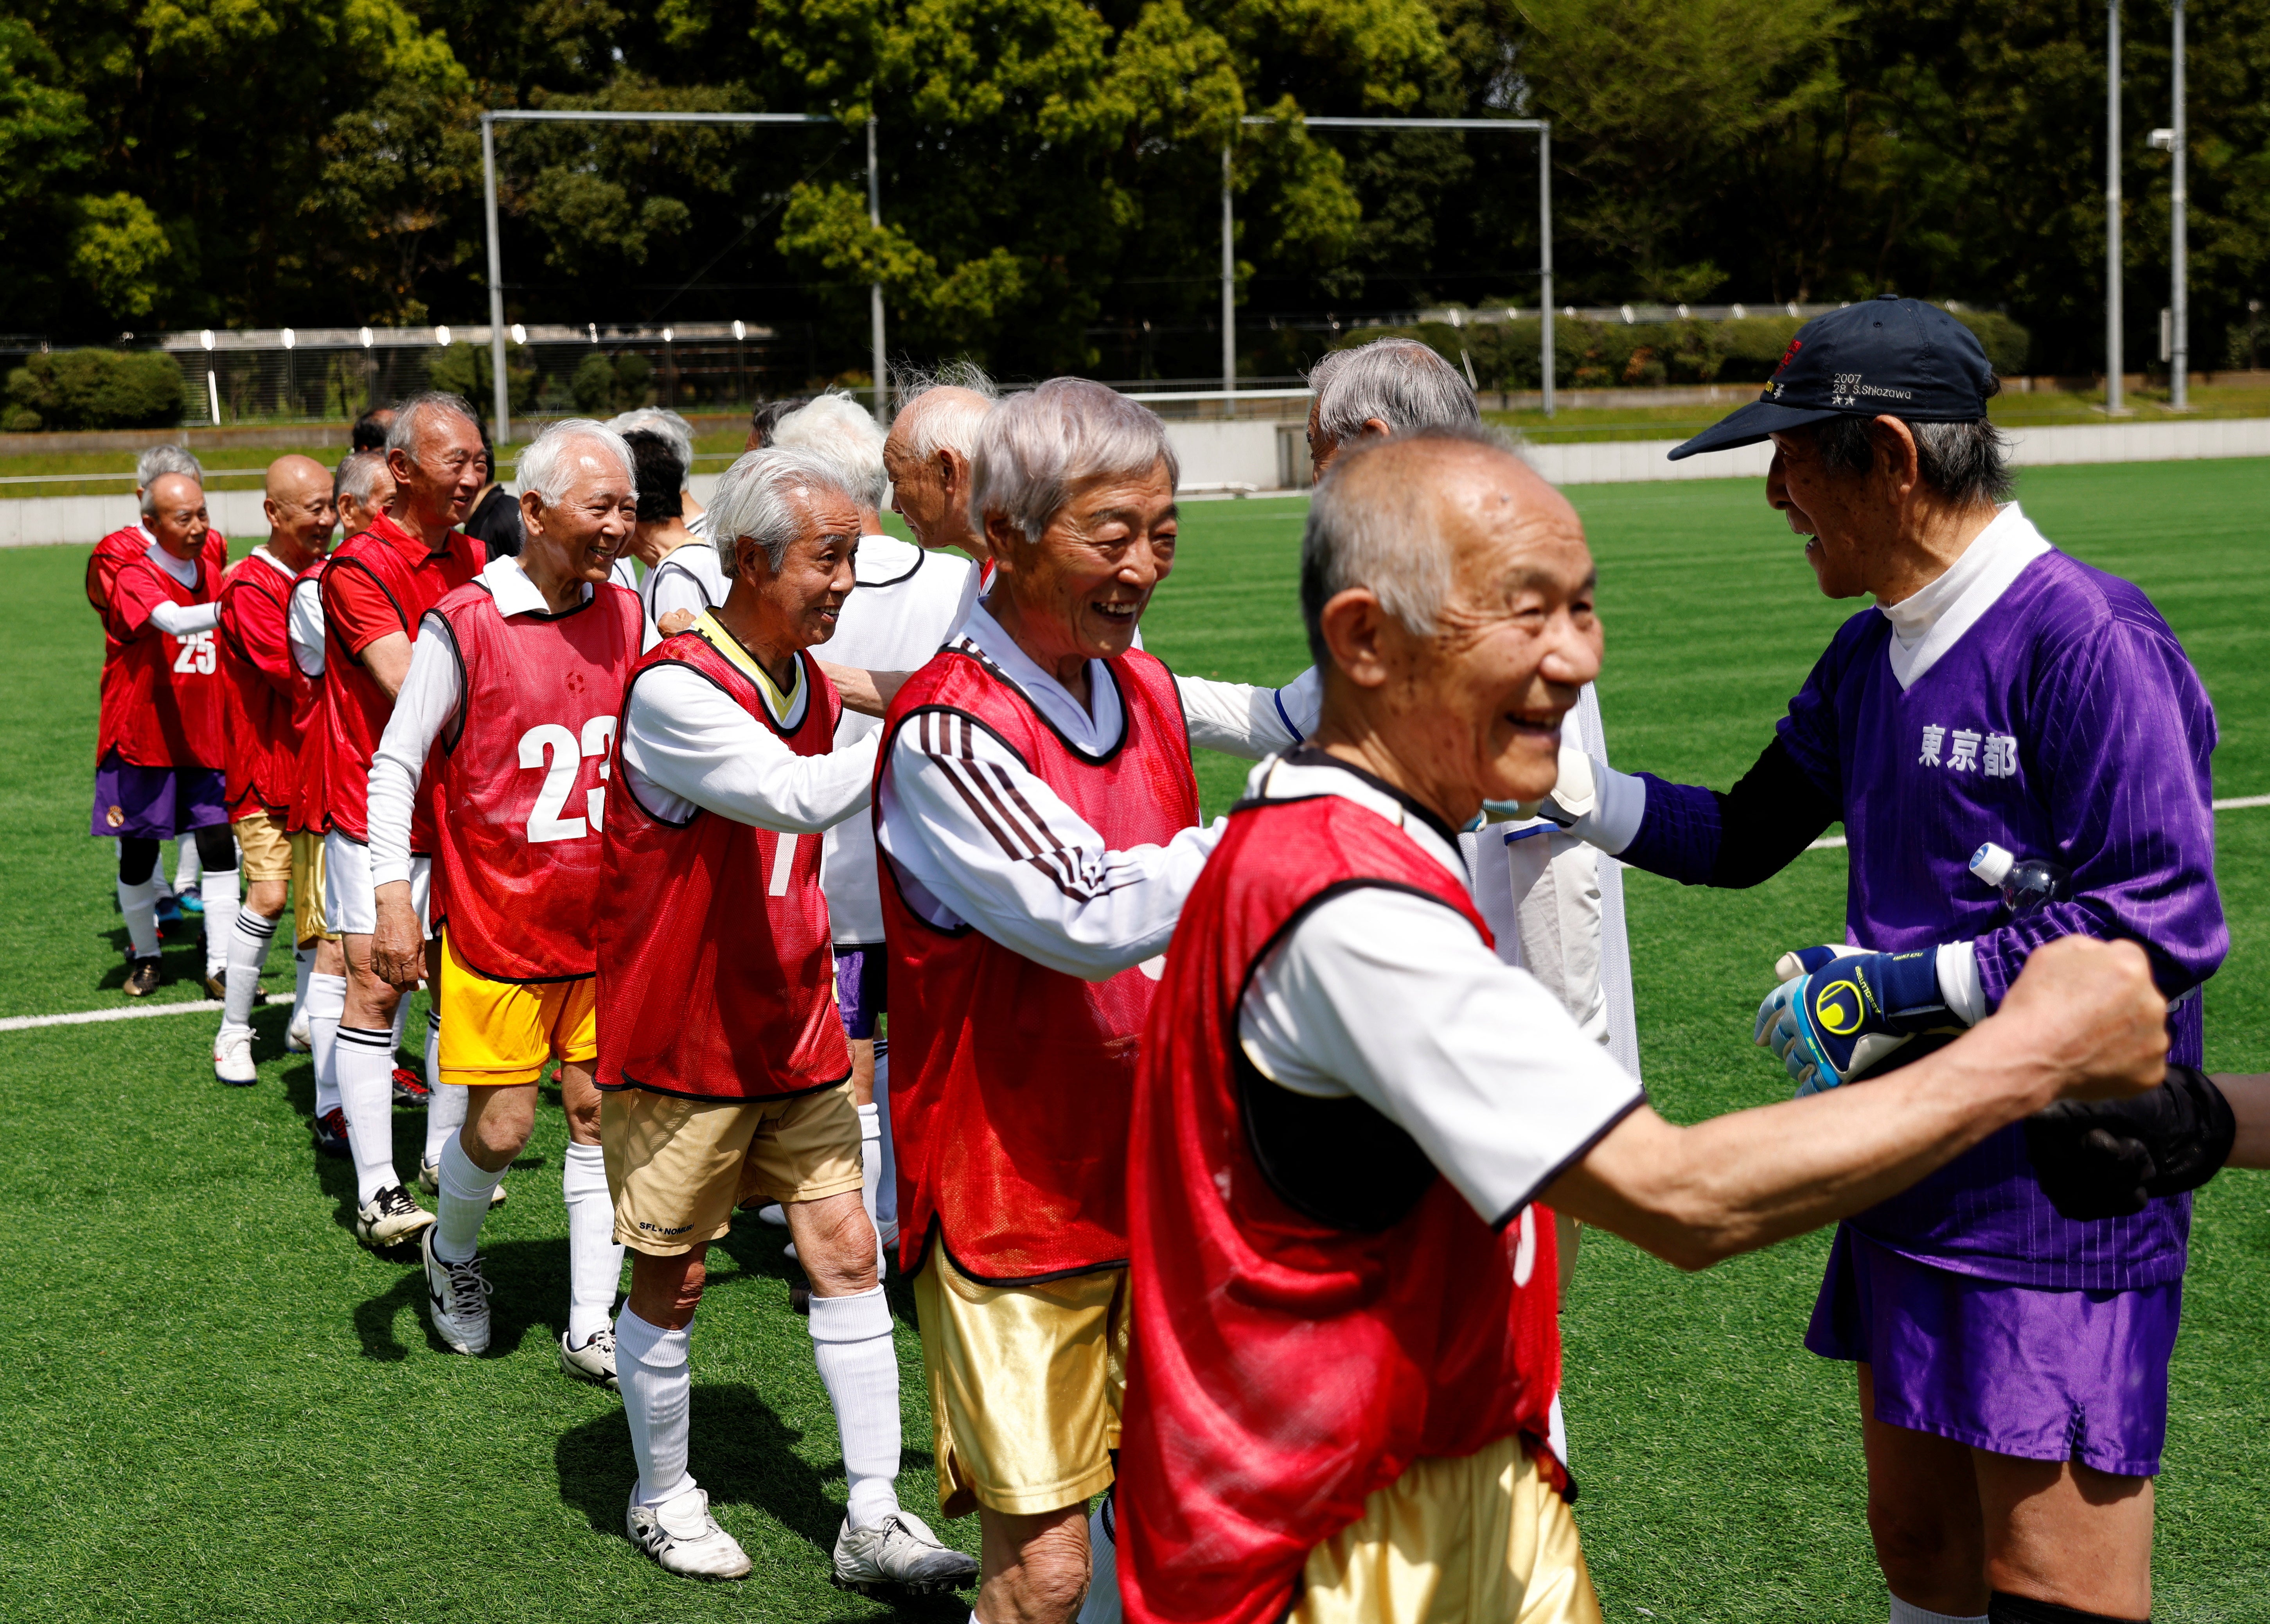 Red Star’s midfielder Mutsuhiko Nomura, 83, and White Bear’s goalkeeper Shingo Shiozawa, 93, greet their opponents at the SFL (Soccer For Life) 80 League opening match in Tokyo, Japan